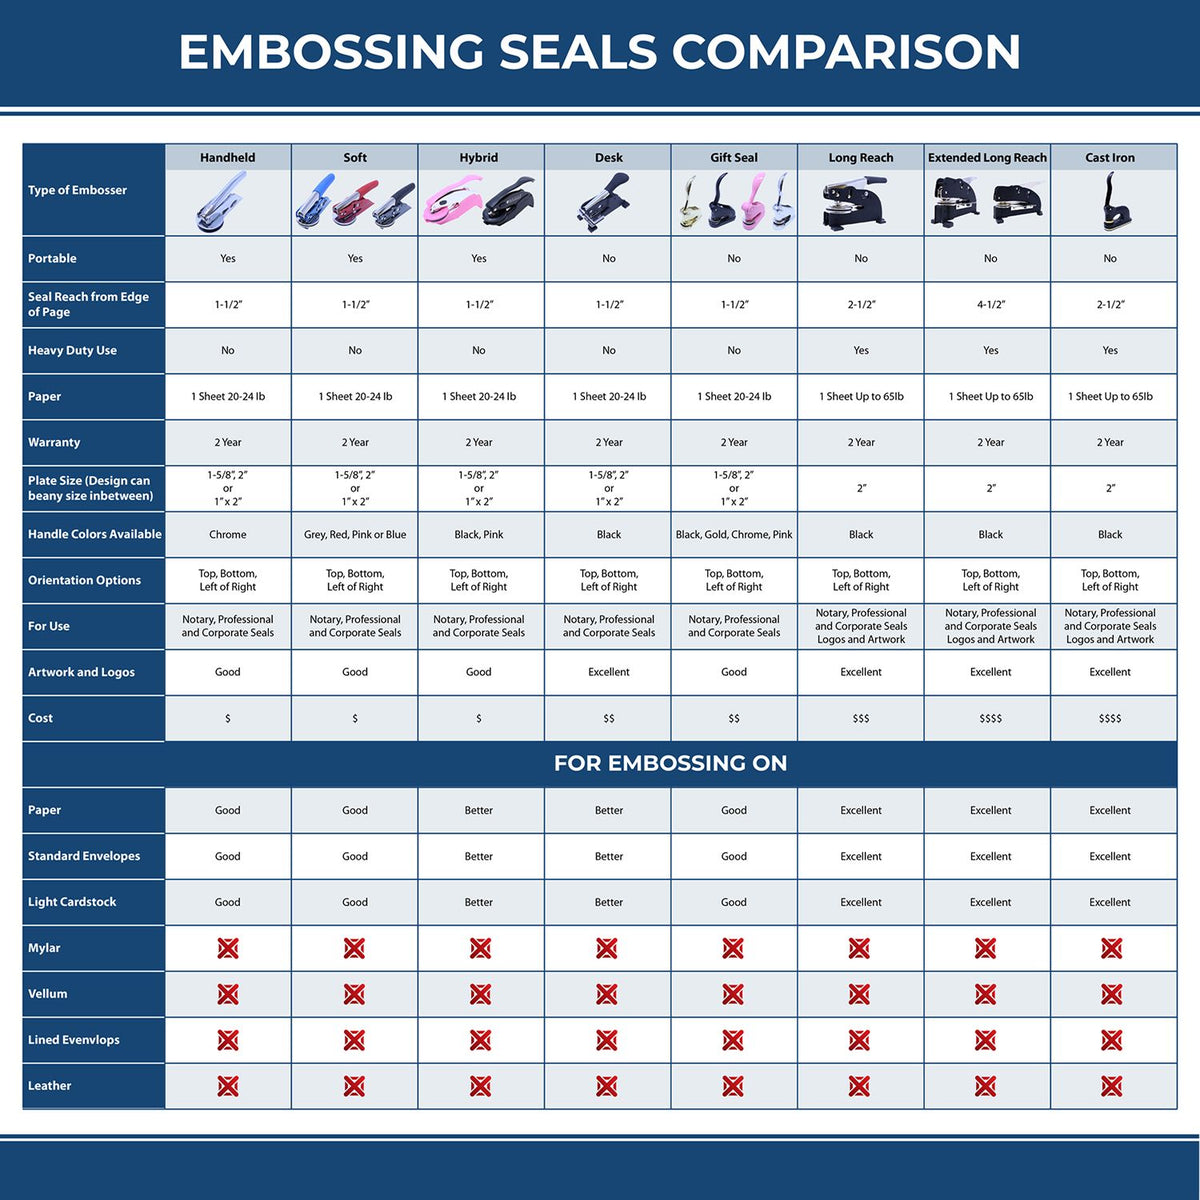 A comparison chart for the different types of mount models available for the Extended Long Reach Alabama Architect Seal Embosser.